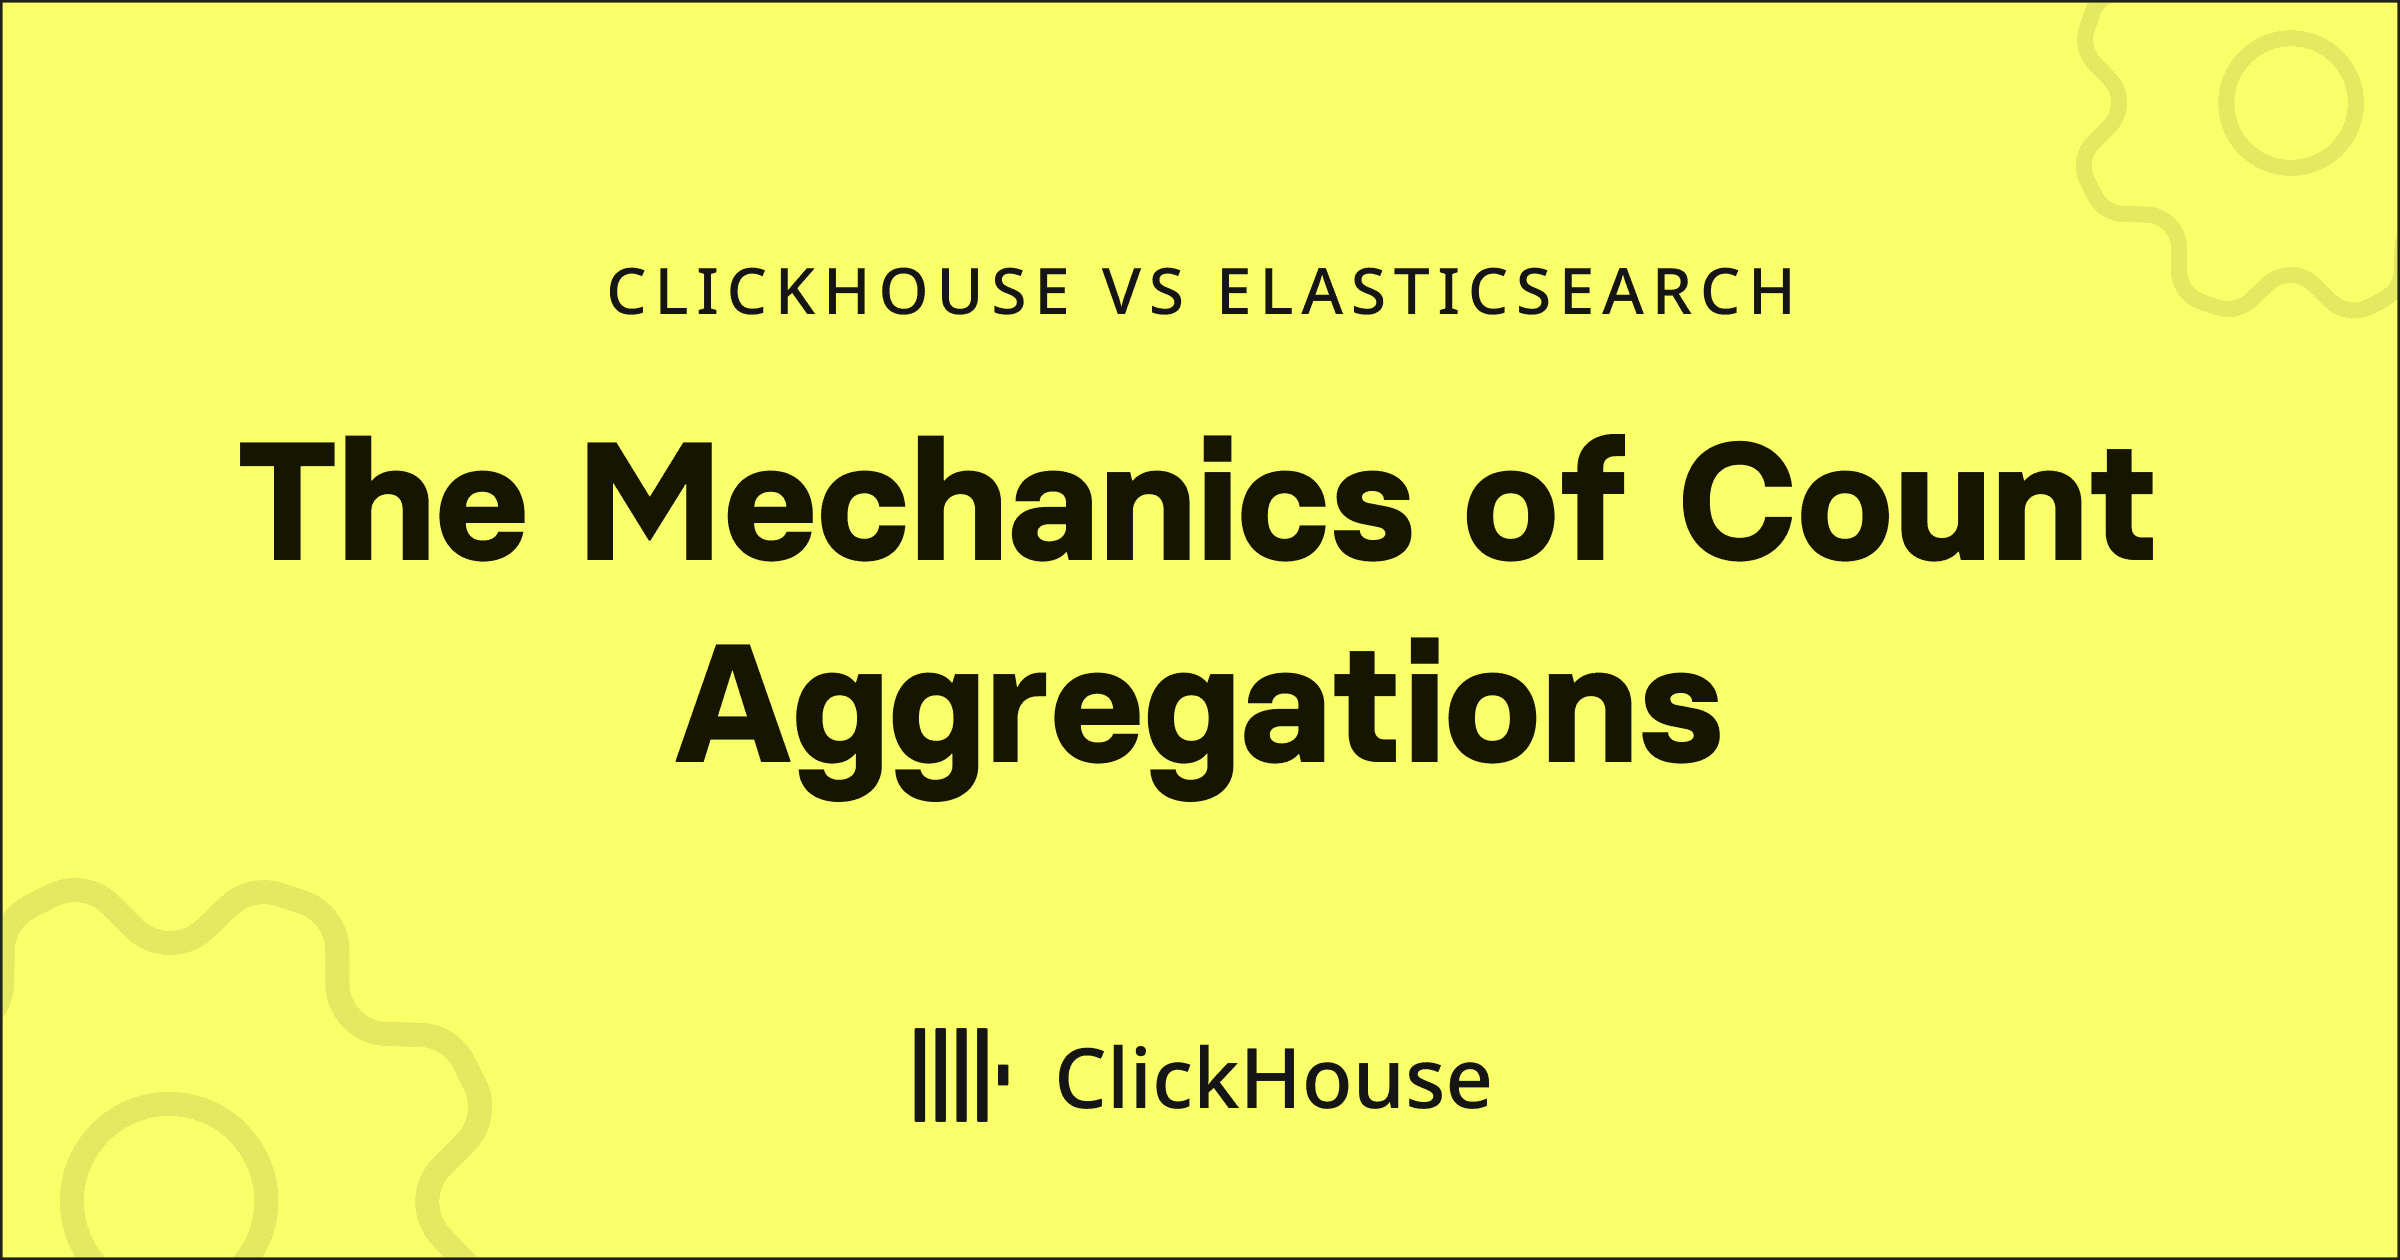 In another blog post, we examined the performance of ClickHouse vs. Elasticsearch on a workload commonly present in large-scale data analytics and obs